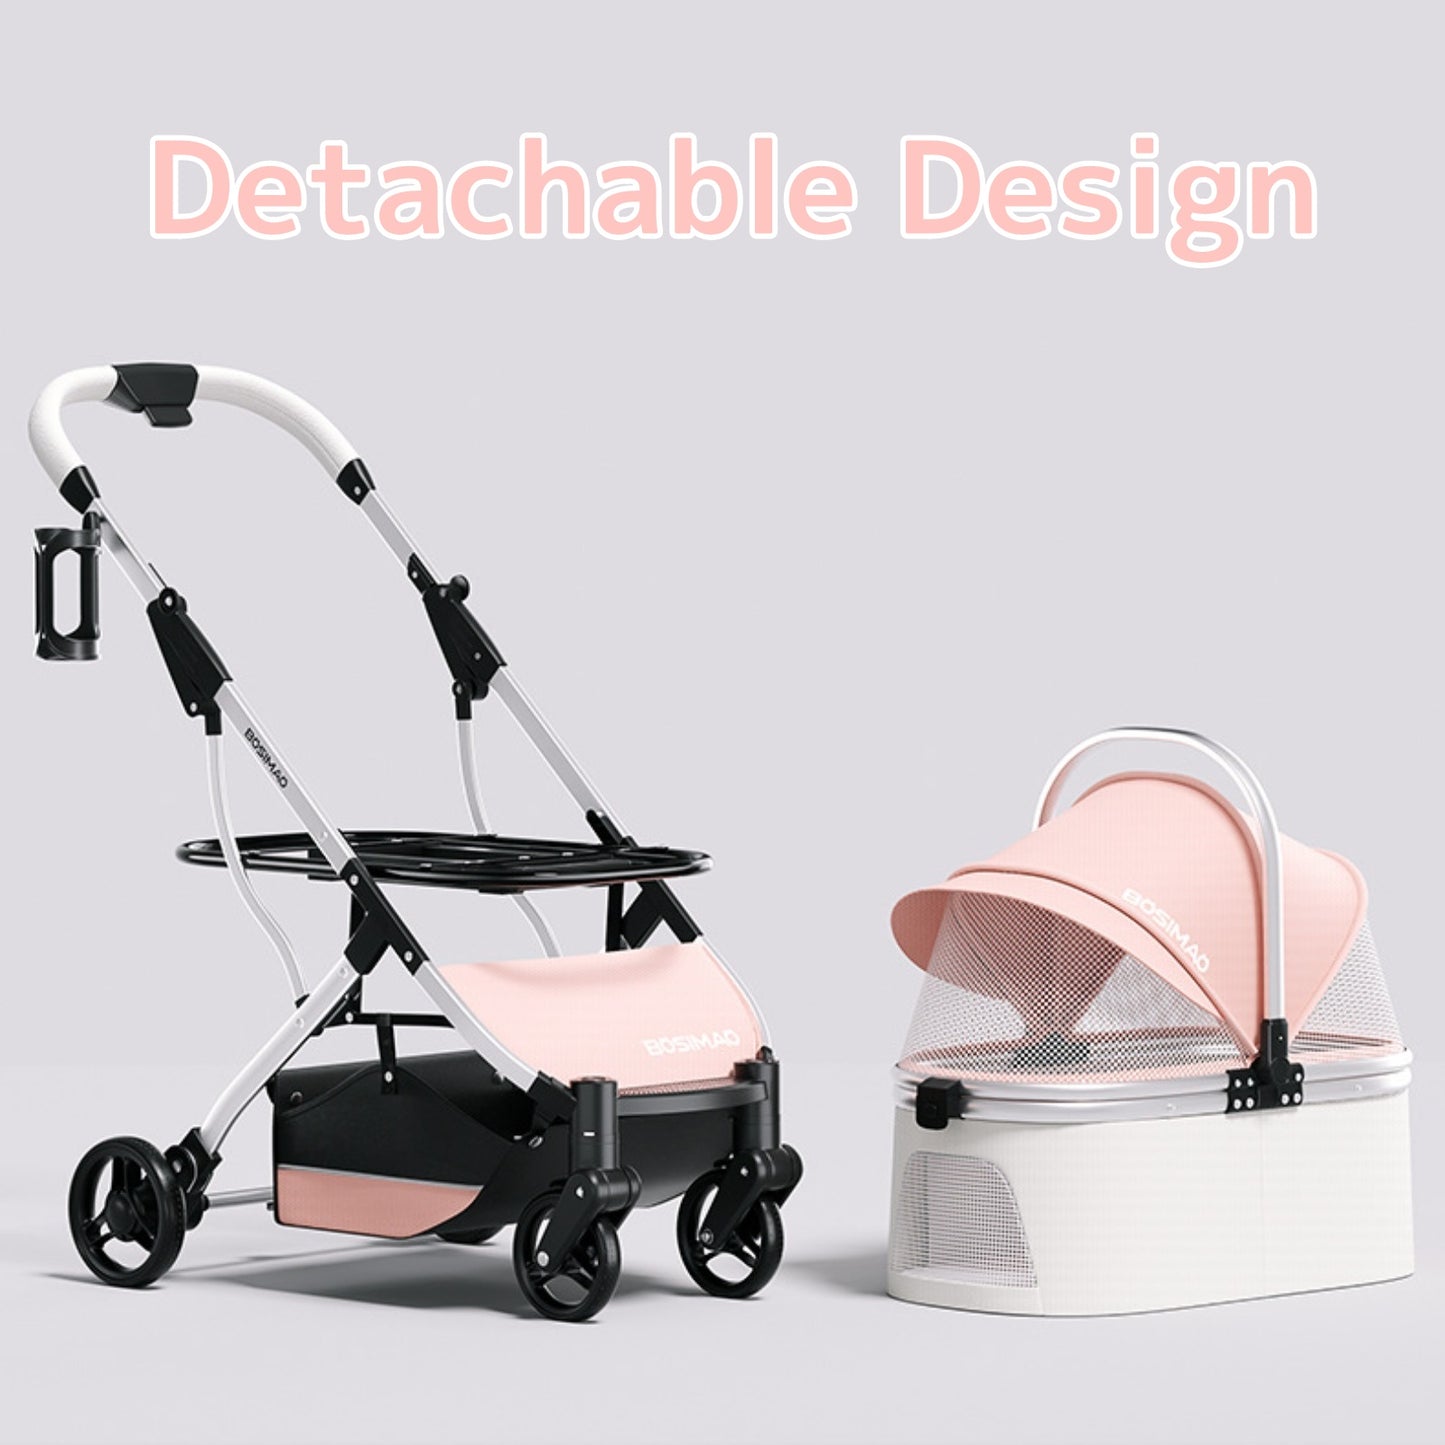 Pet Stroller for Small Dogs Pet Comfy Anywhere with Our Foldable Aluminum Alloy Frame Pet Stroller - Lightweight, Waterproof, and Easy To Clean